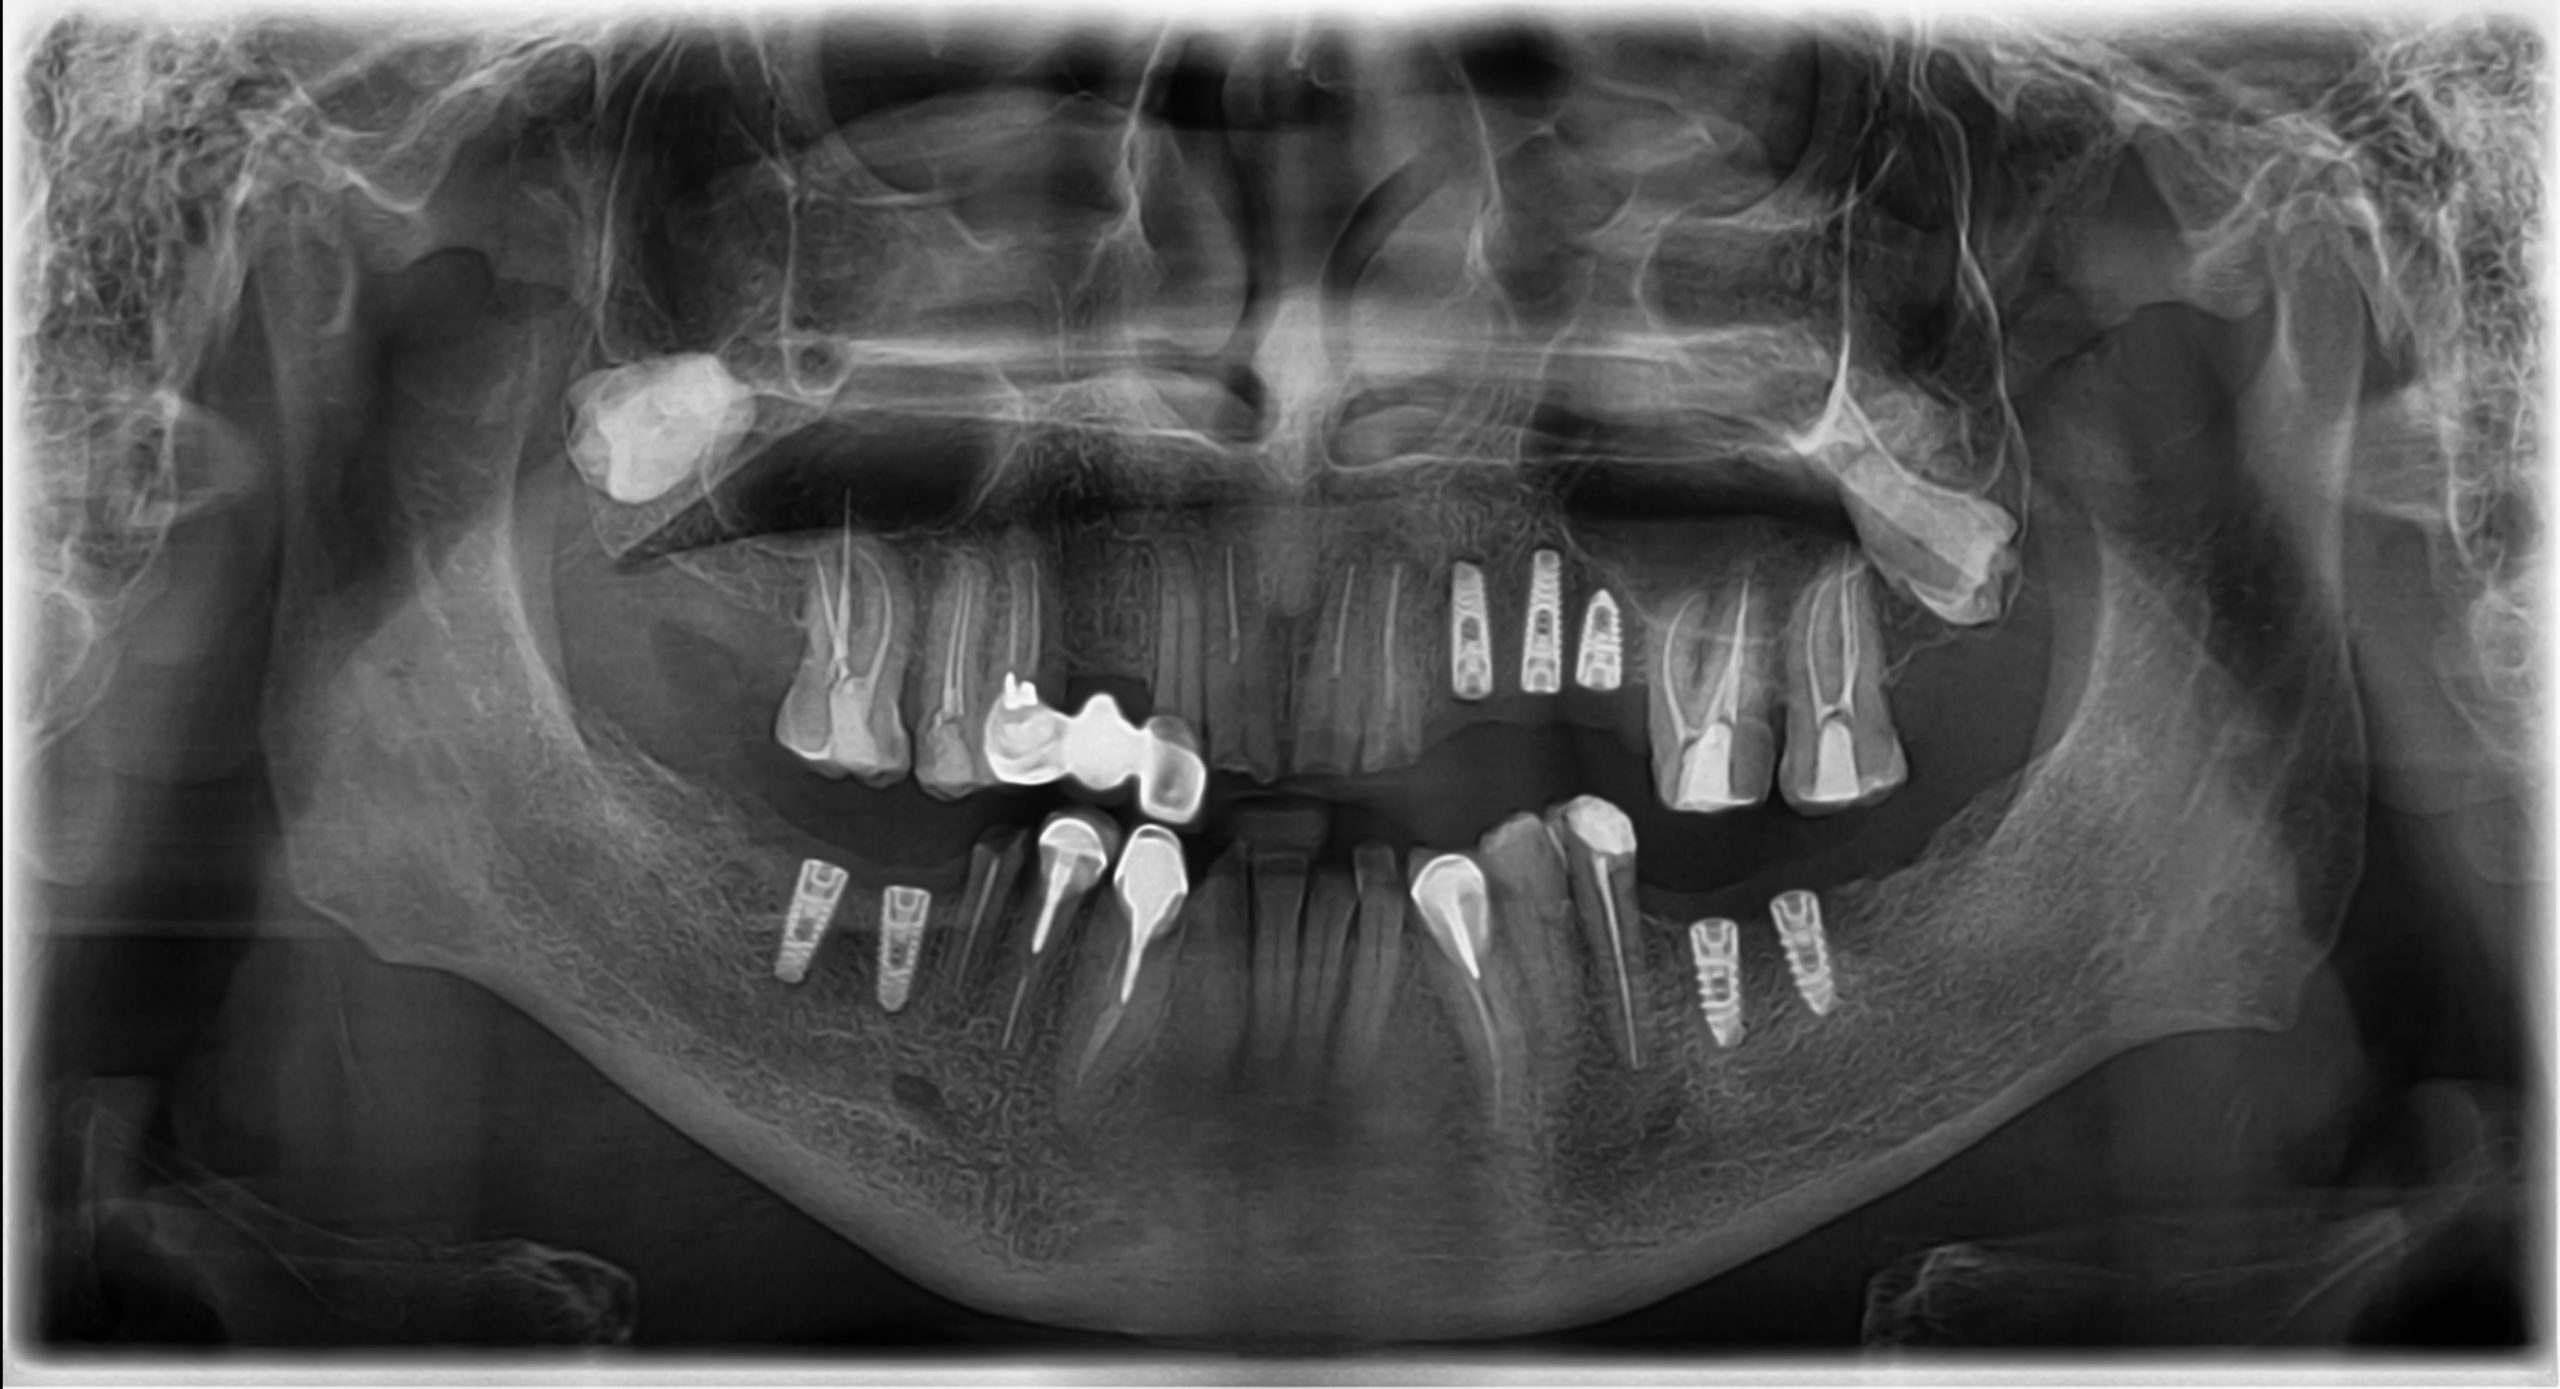 https://dentalexcellence.co.in/wp-content/uploads/2023/02/Pt-3-Post-Implant-Placement-1-scaled.jpg